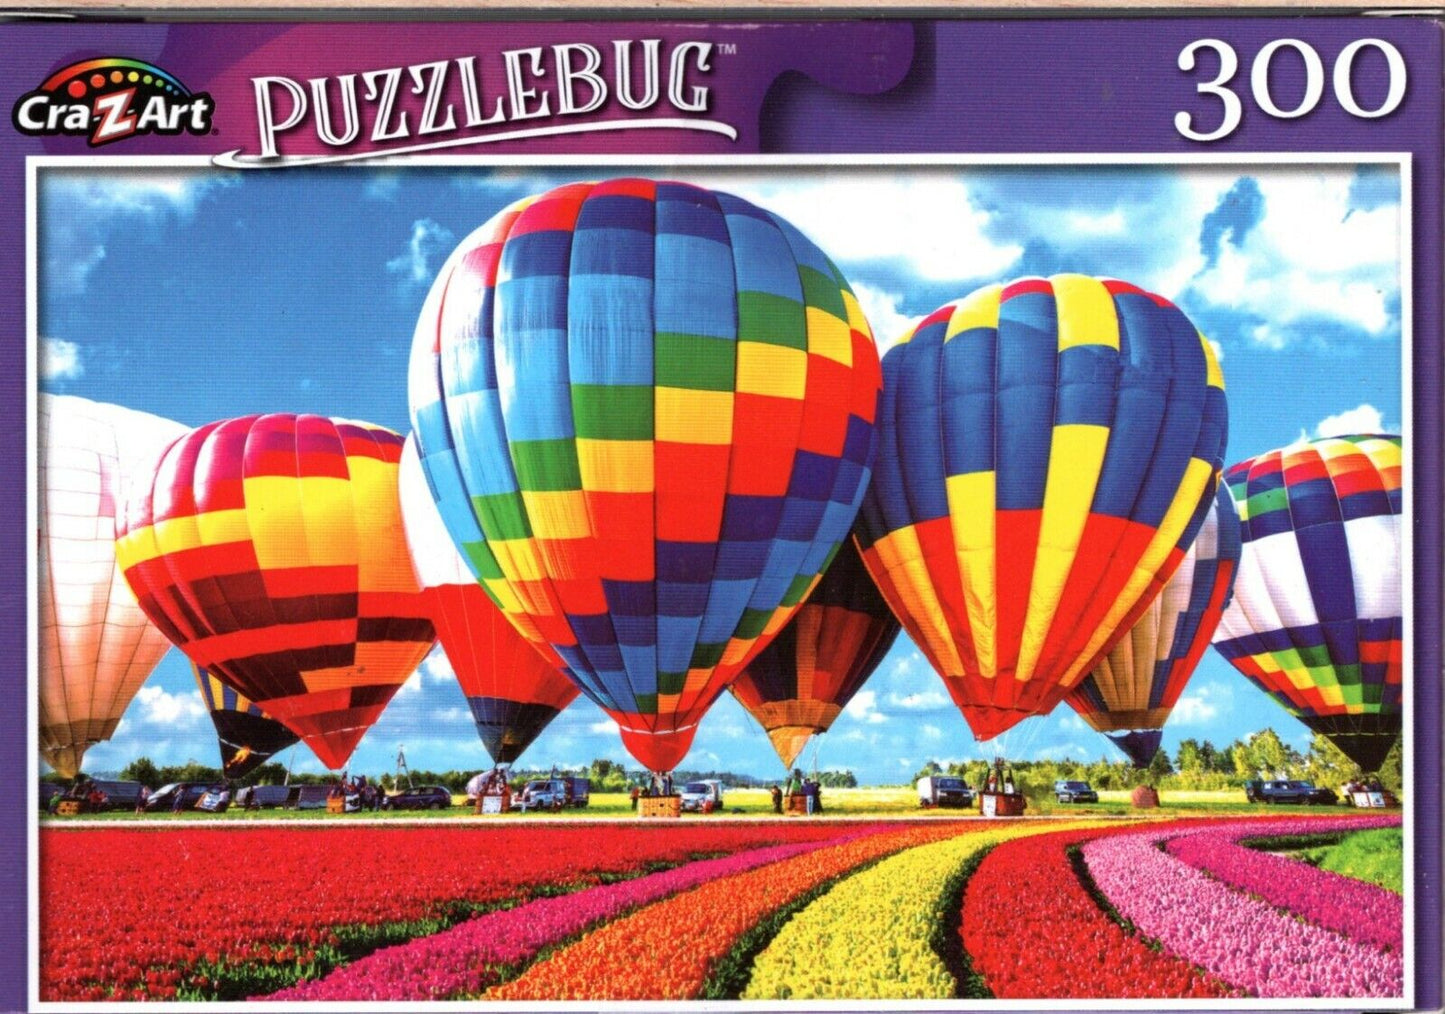 Hot Air Balloons - 300 Pieces Jigsaw Puzzle